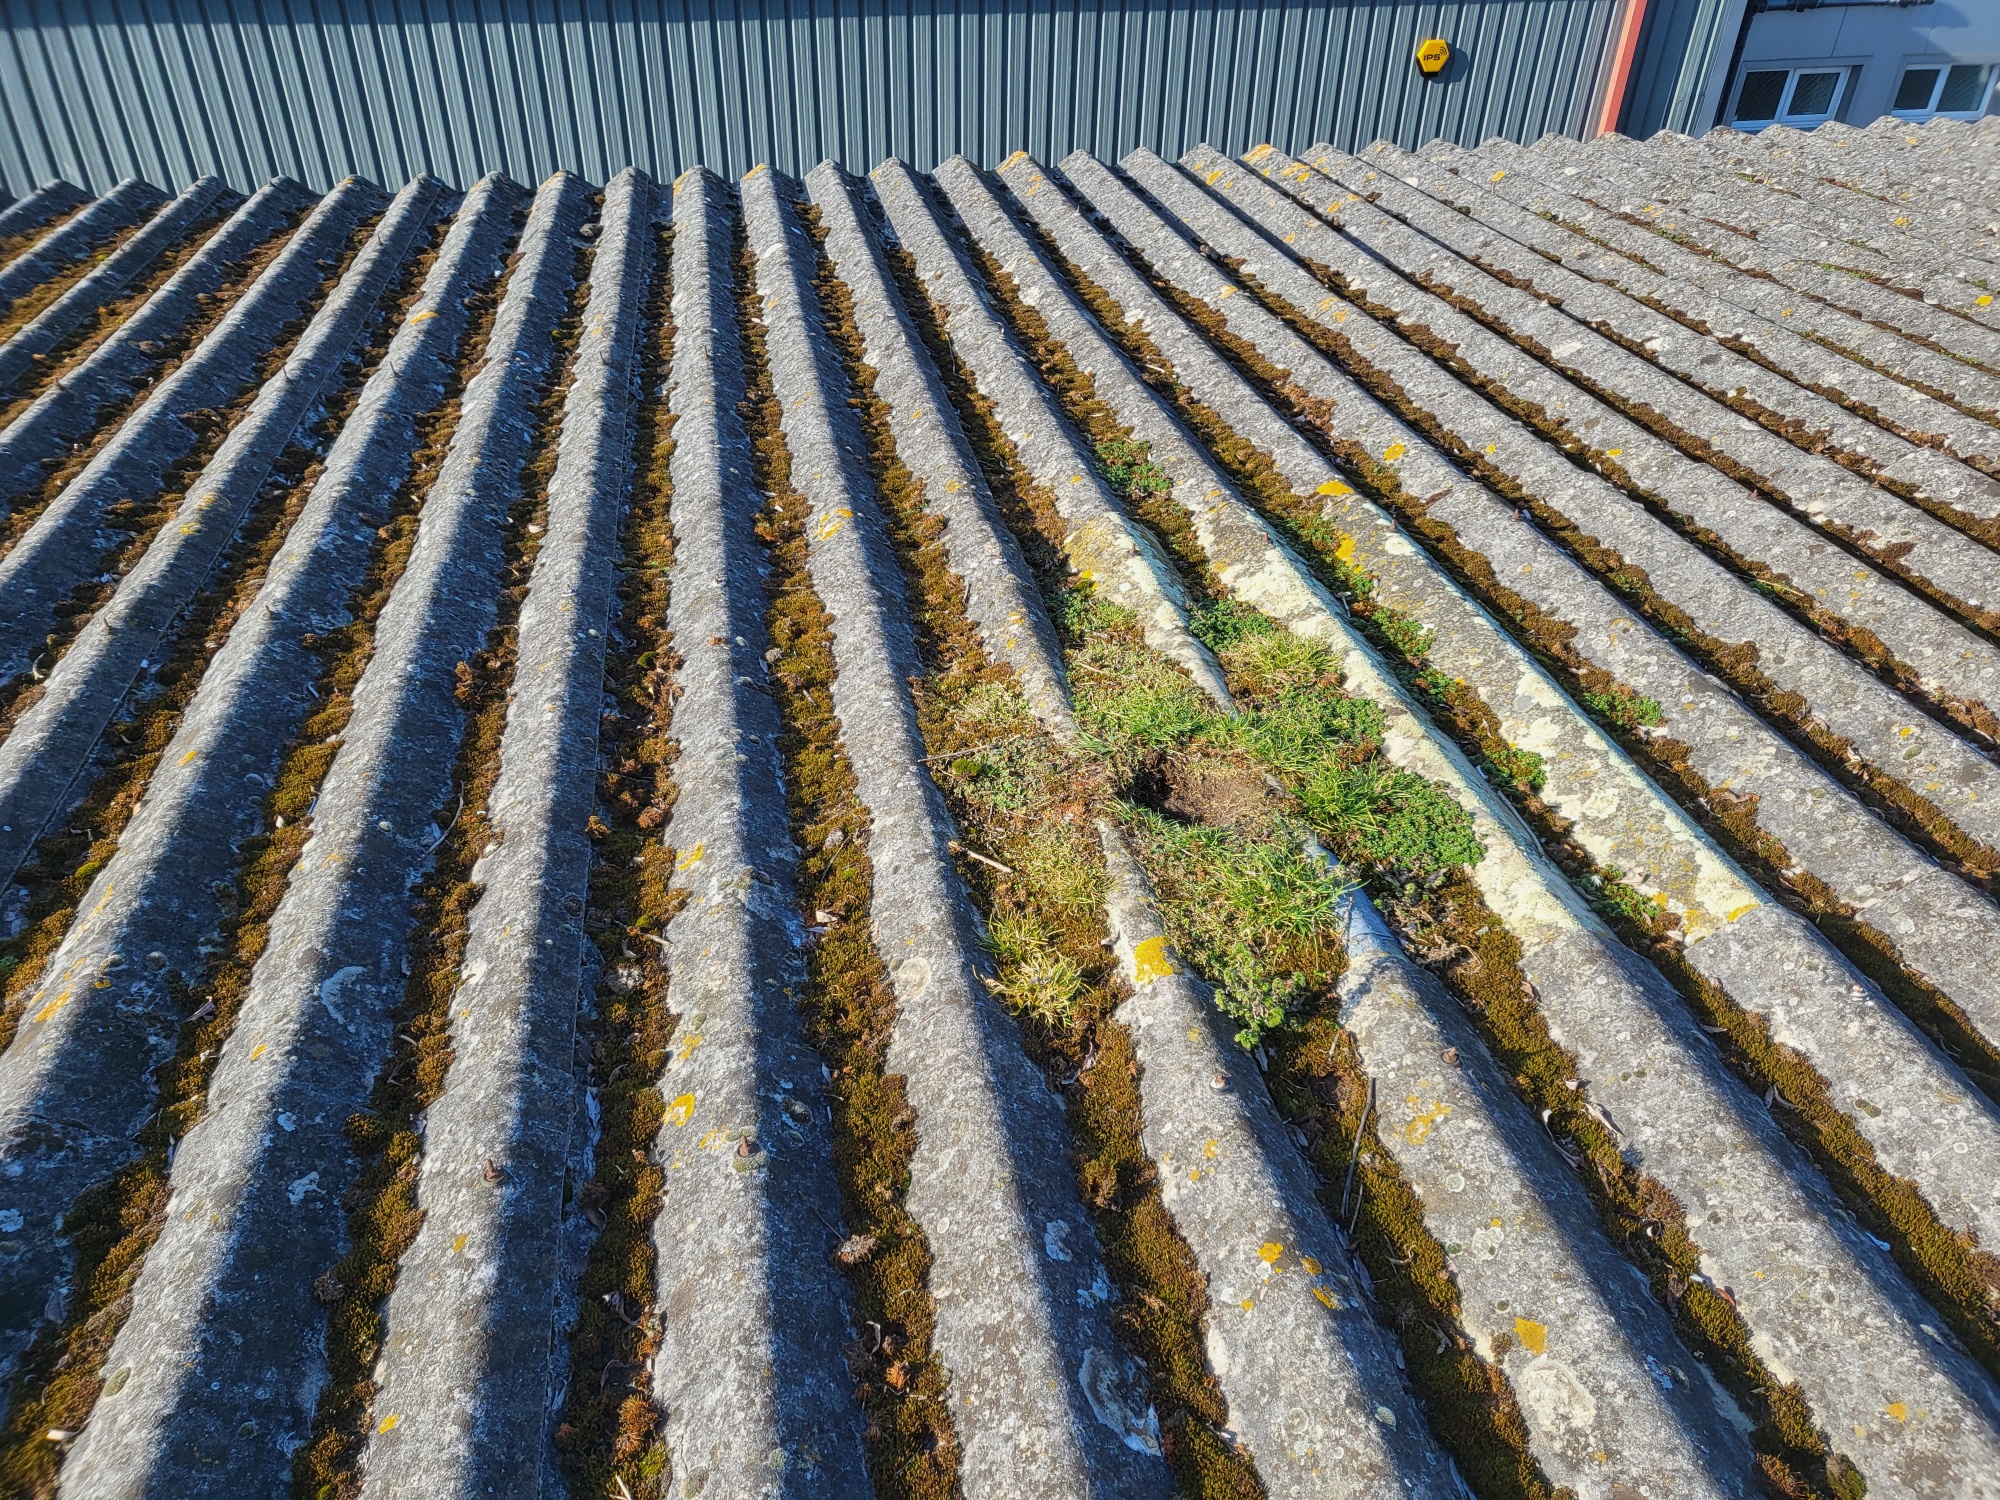 Total cleaning of a Warehouse roof in Bognor Regis, West Sussex